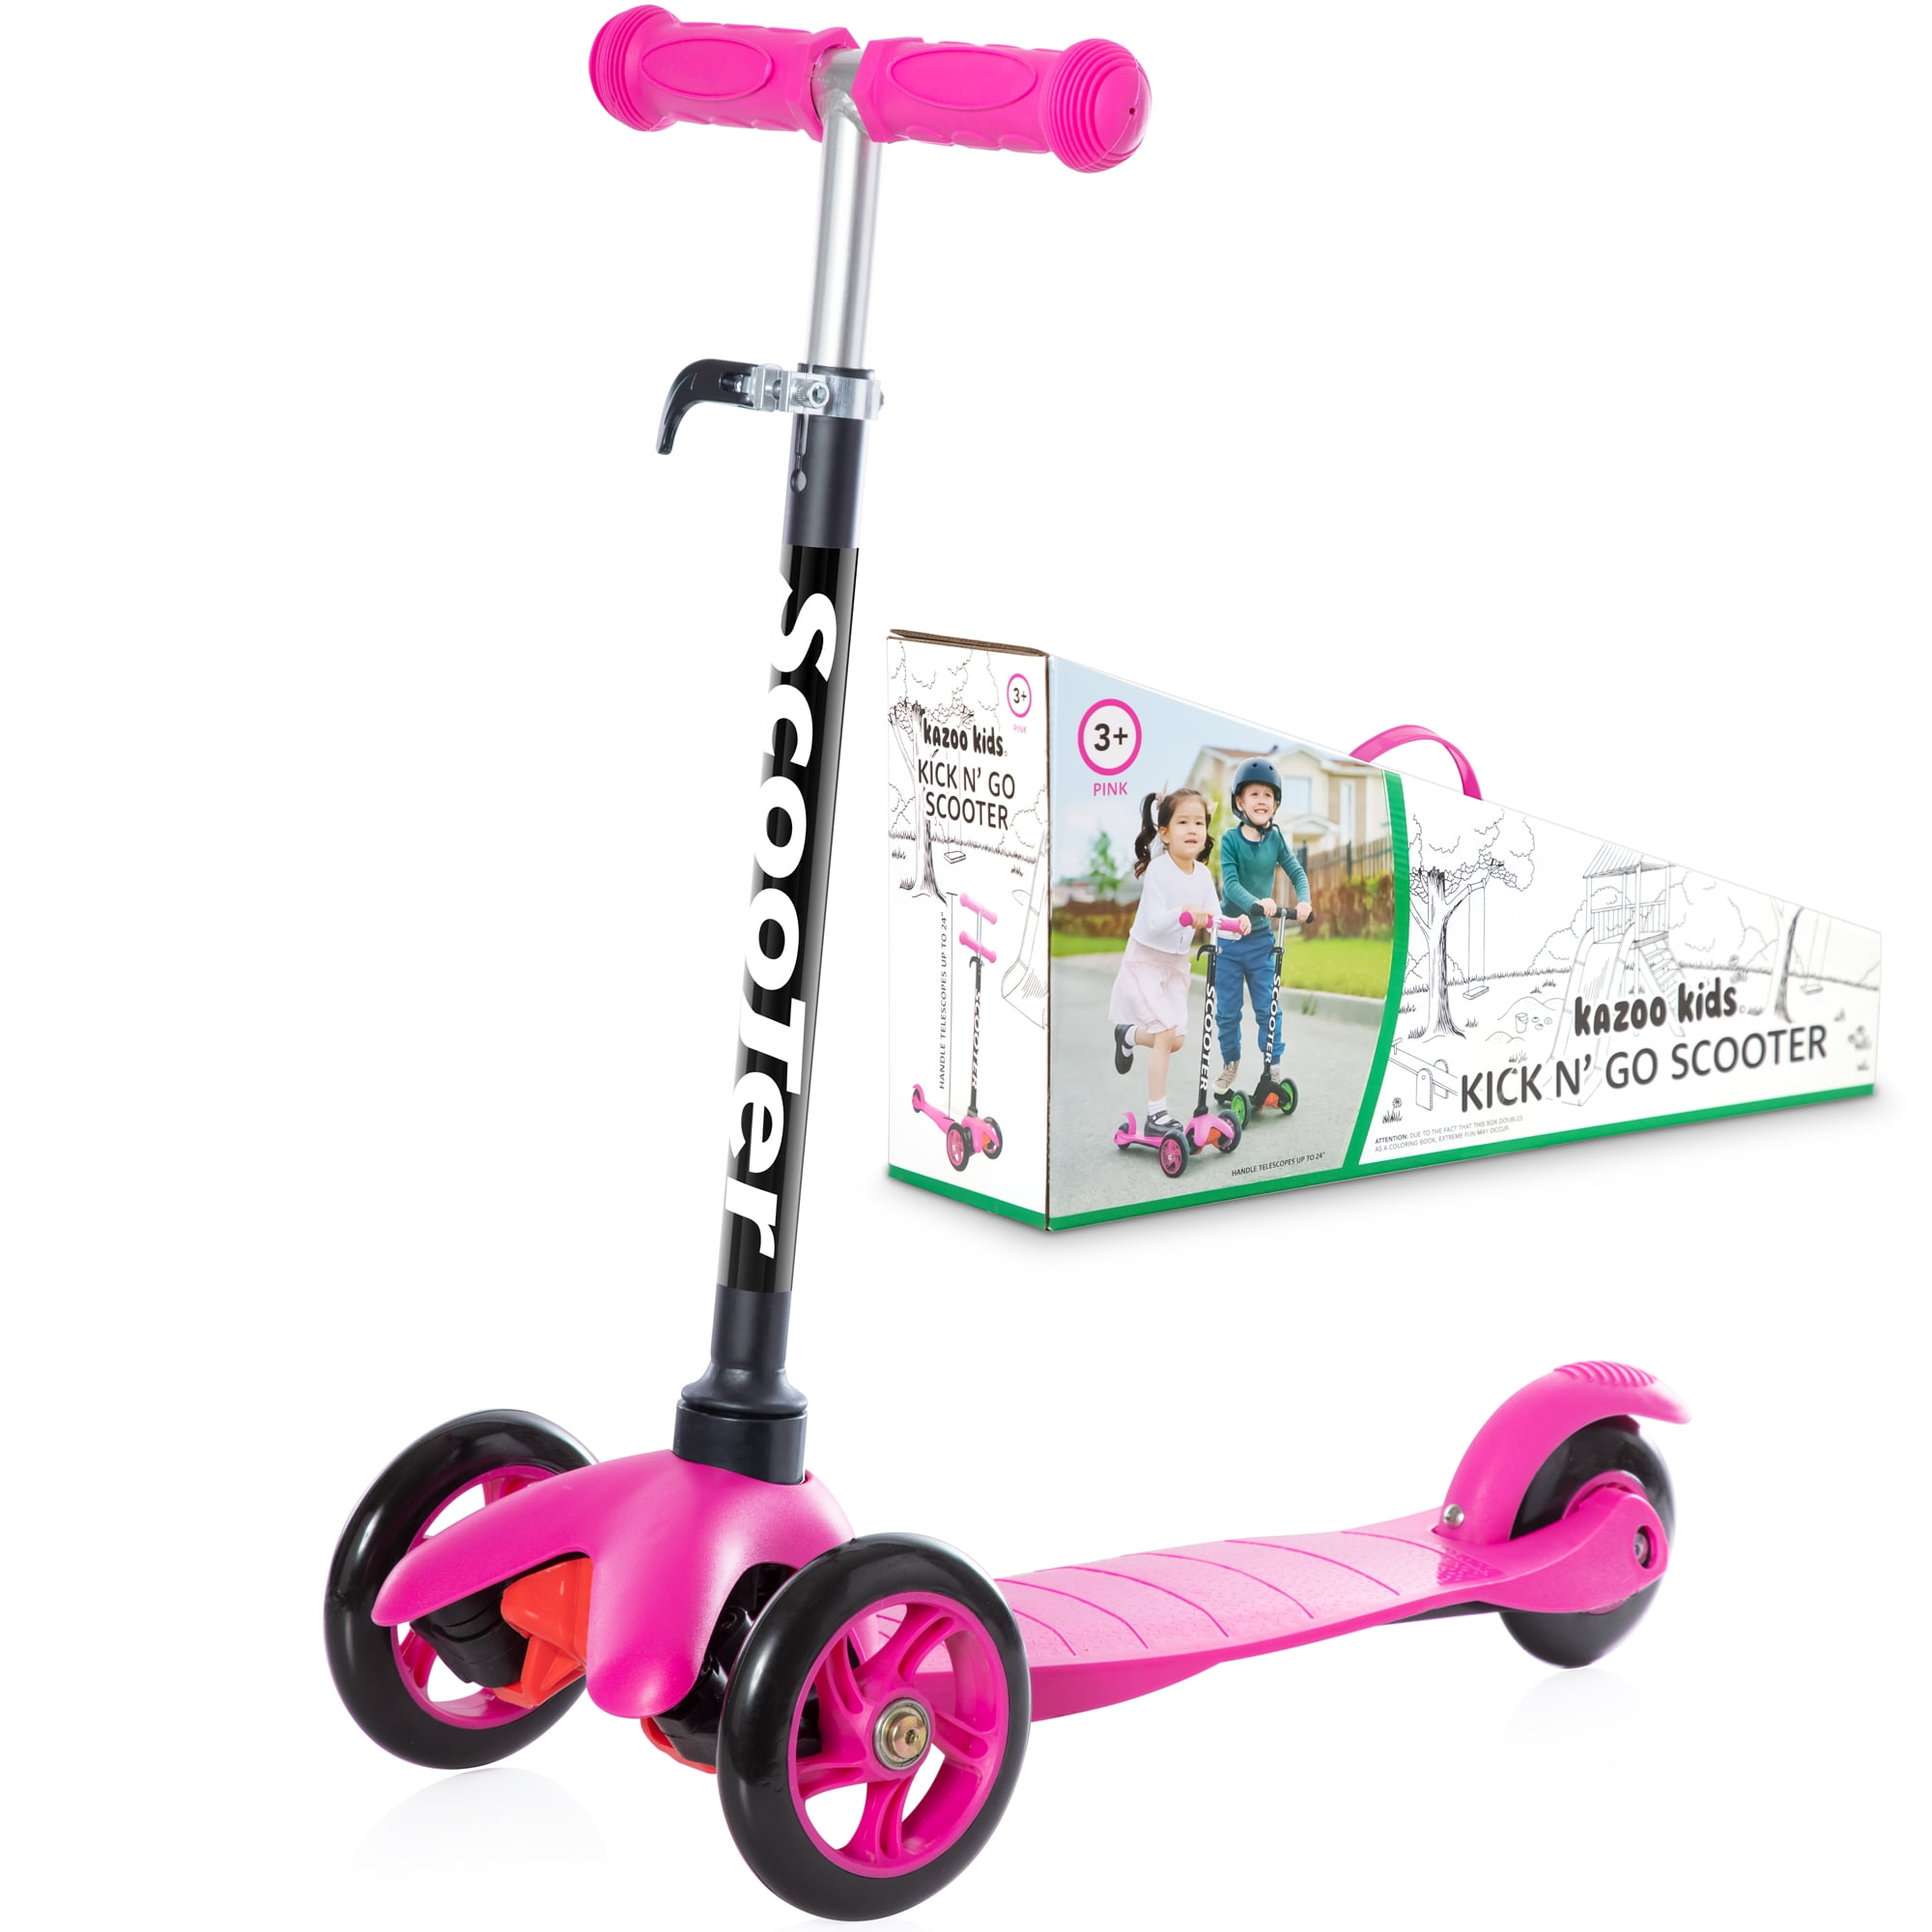 Green Adjustable Height T-bar Handle Kids Scooter Voyage Sports Kick Scooter for Kids Ages 2-6 3 Wheel Scooter for Boys and Girls